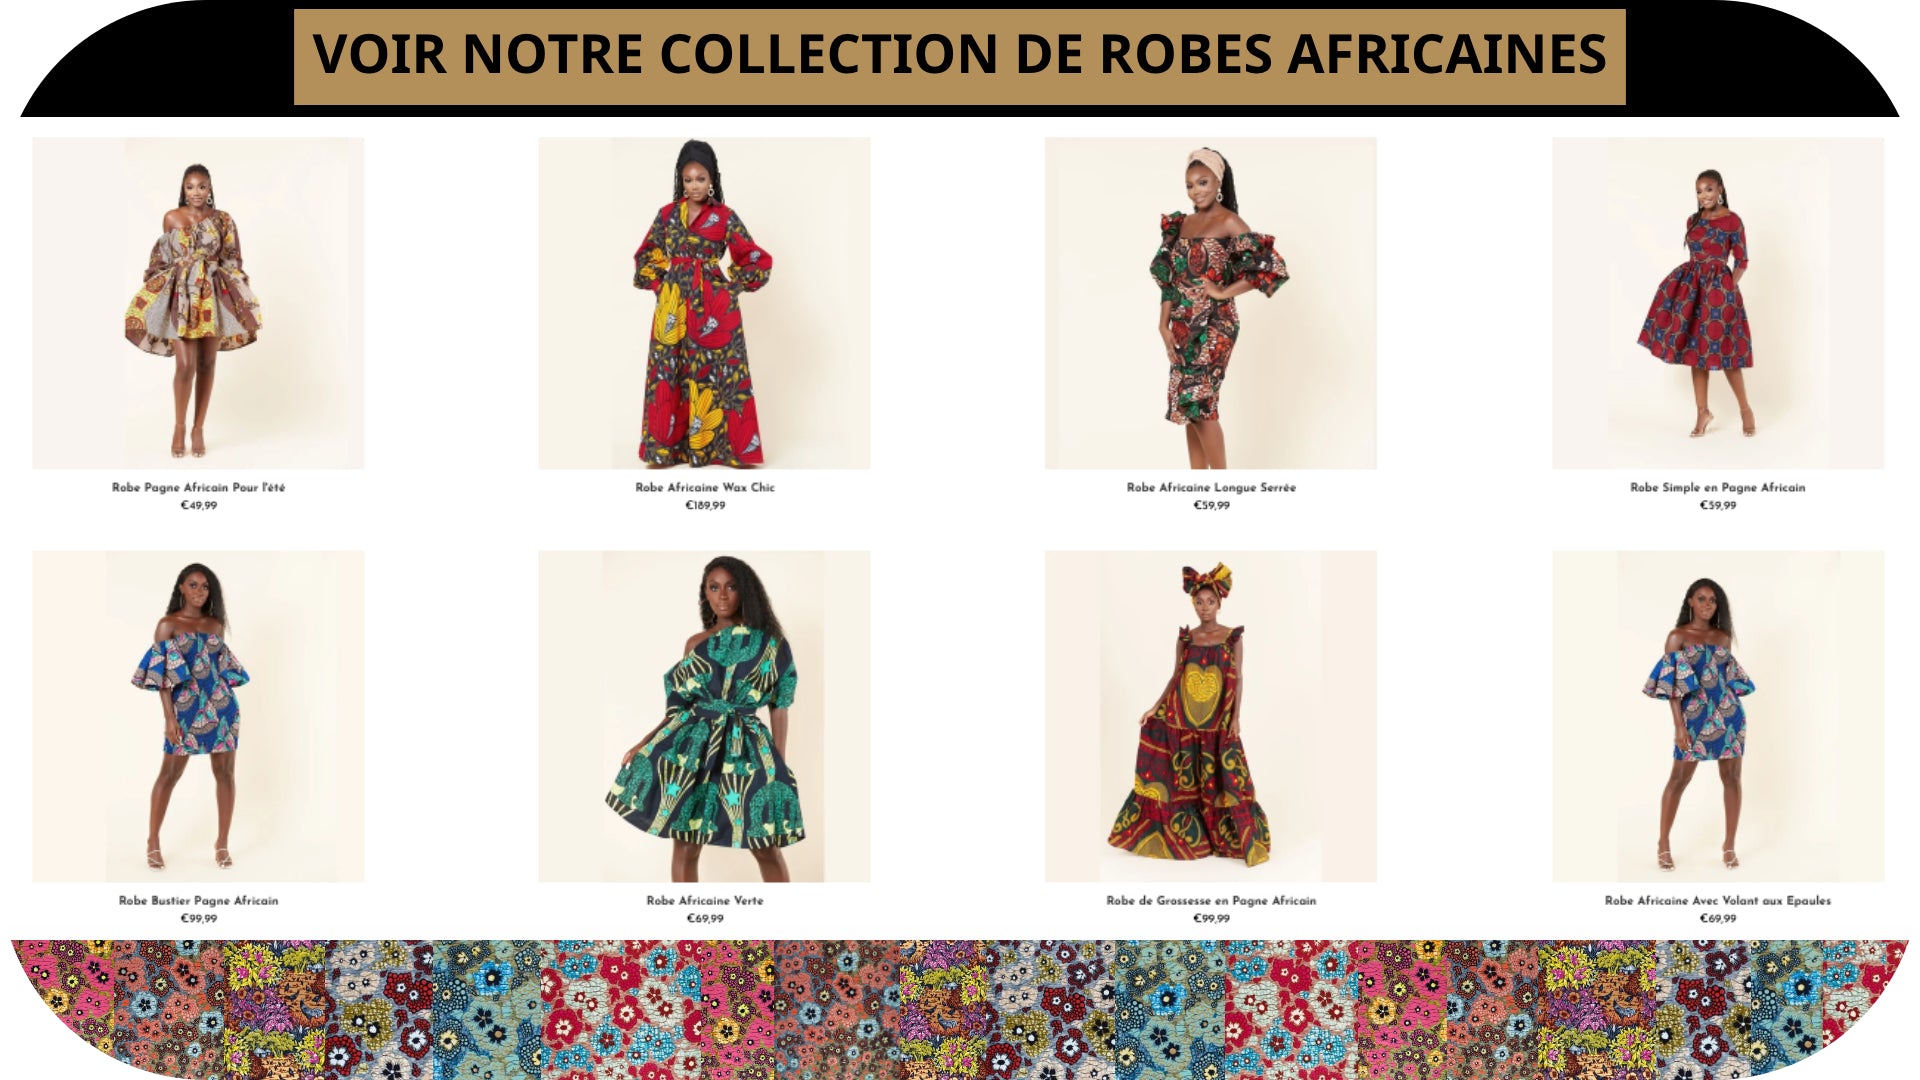 African dress collection - Kingdom of Africa